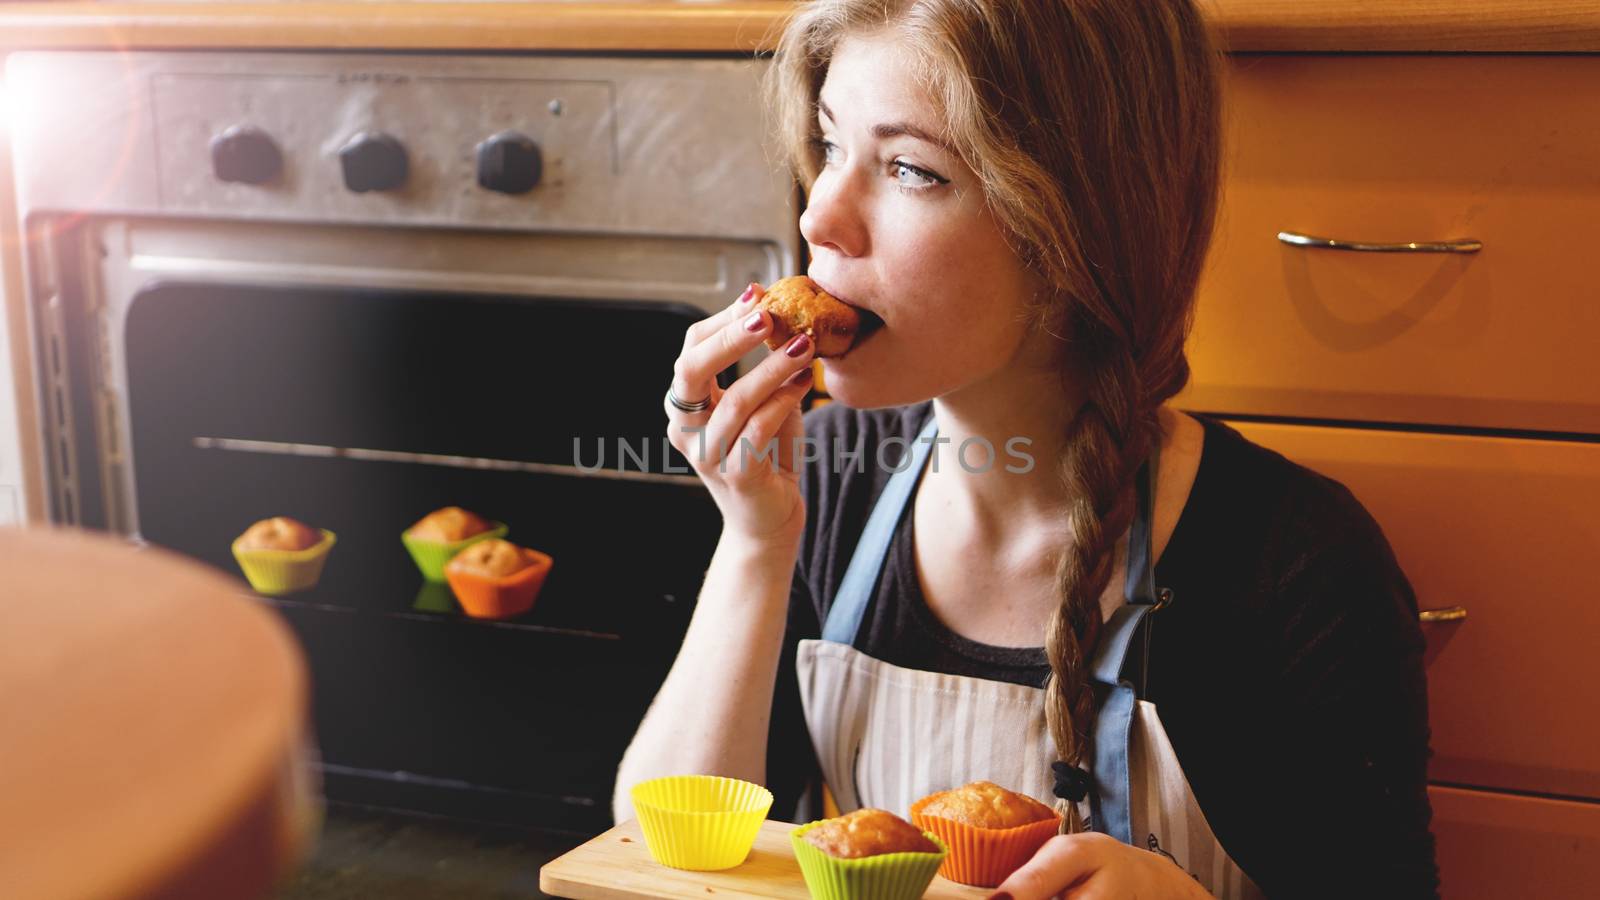 Beautiful blonde woman showing muffins while eating one in a kitchen. Cooking and home concept